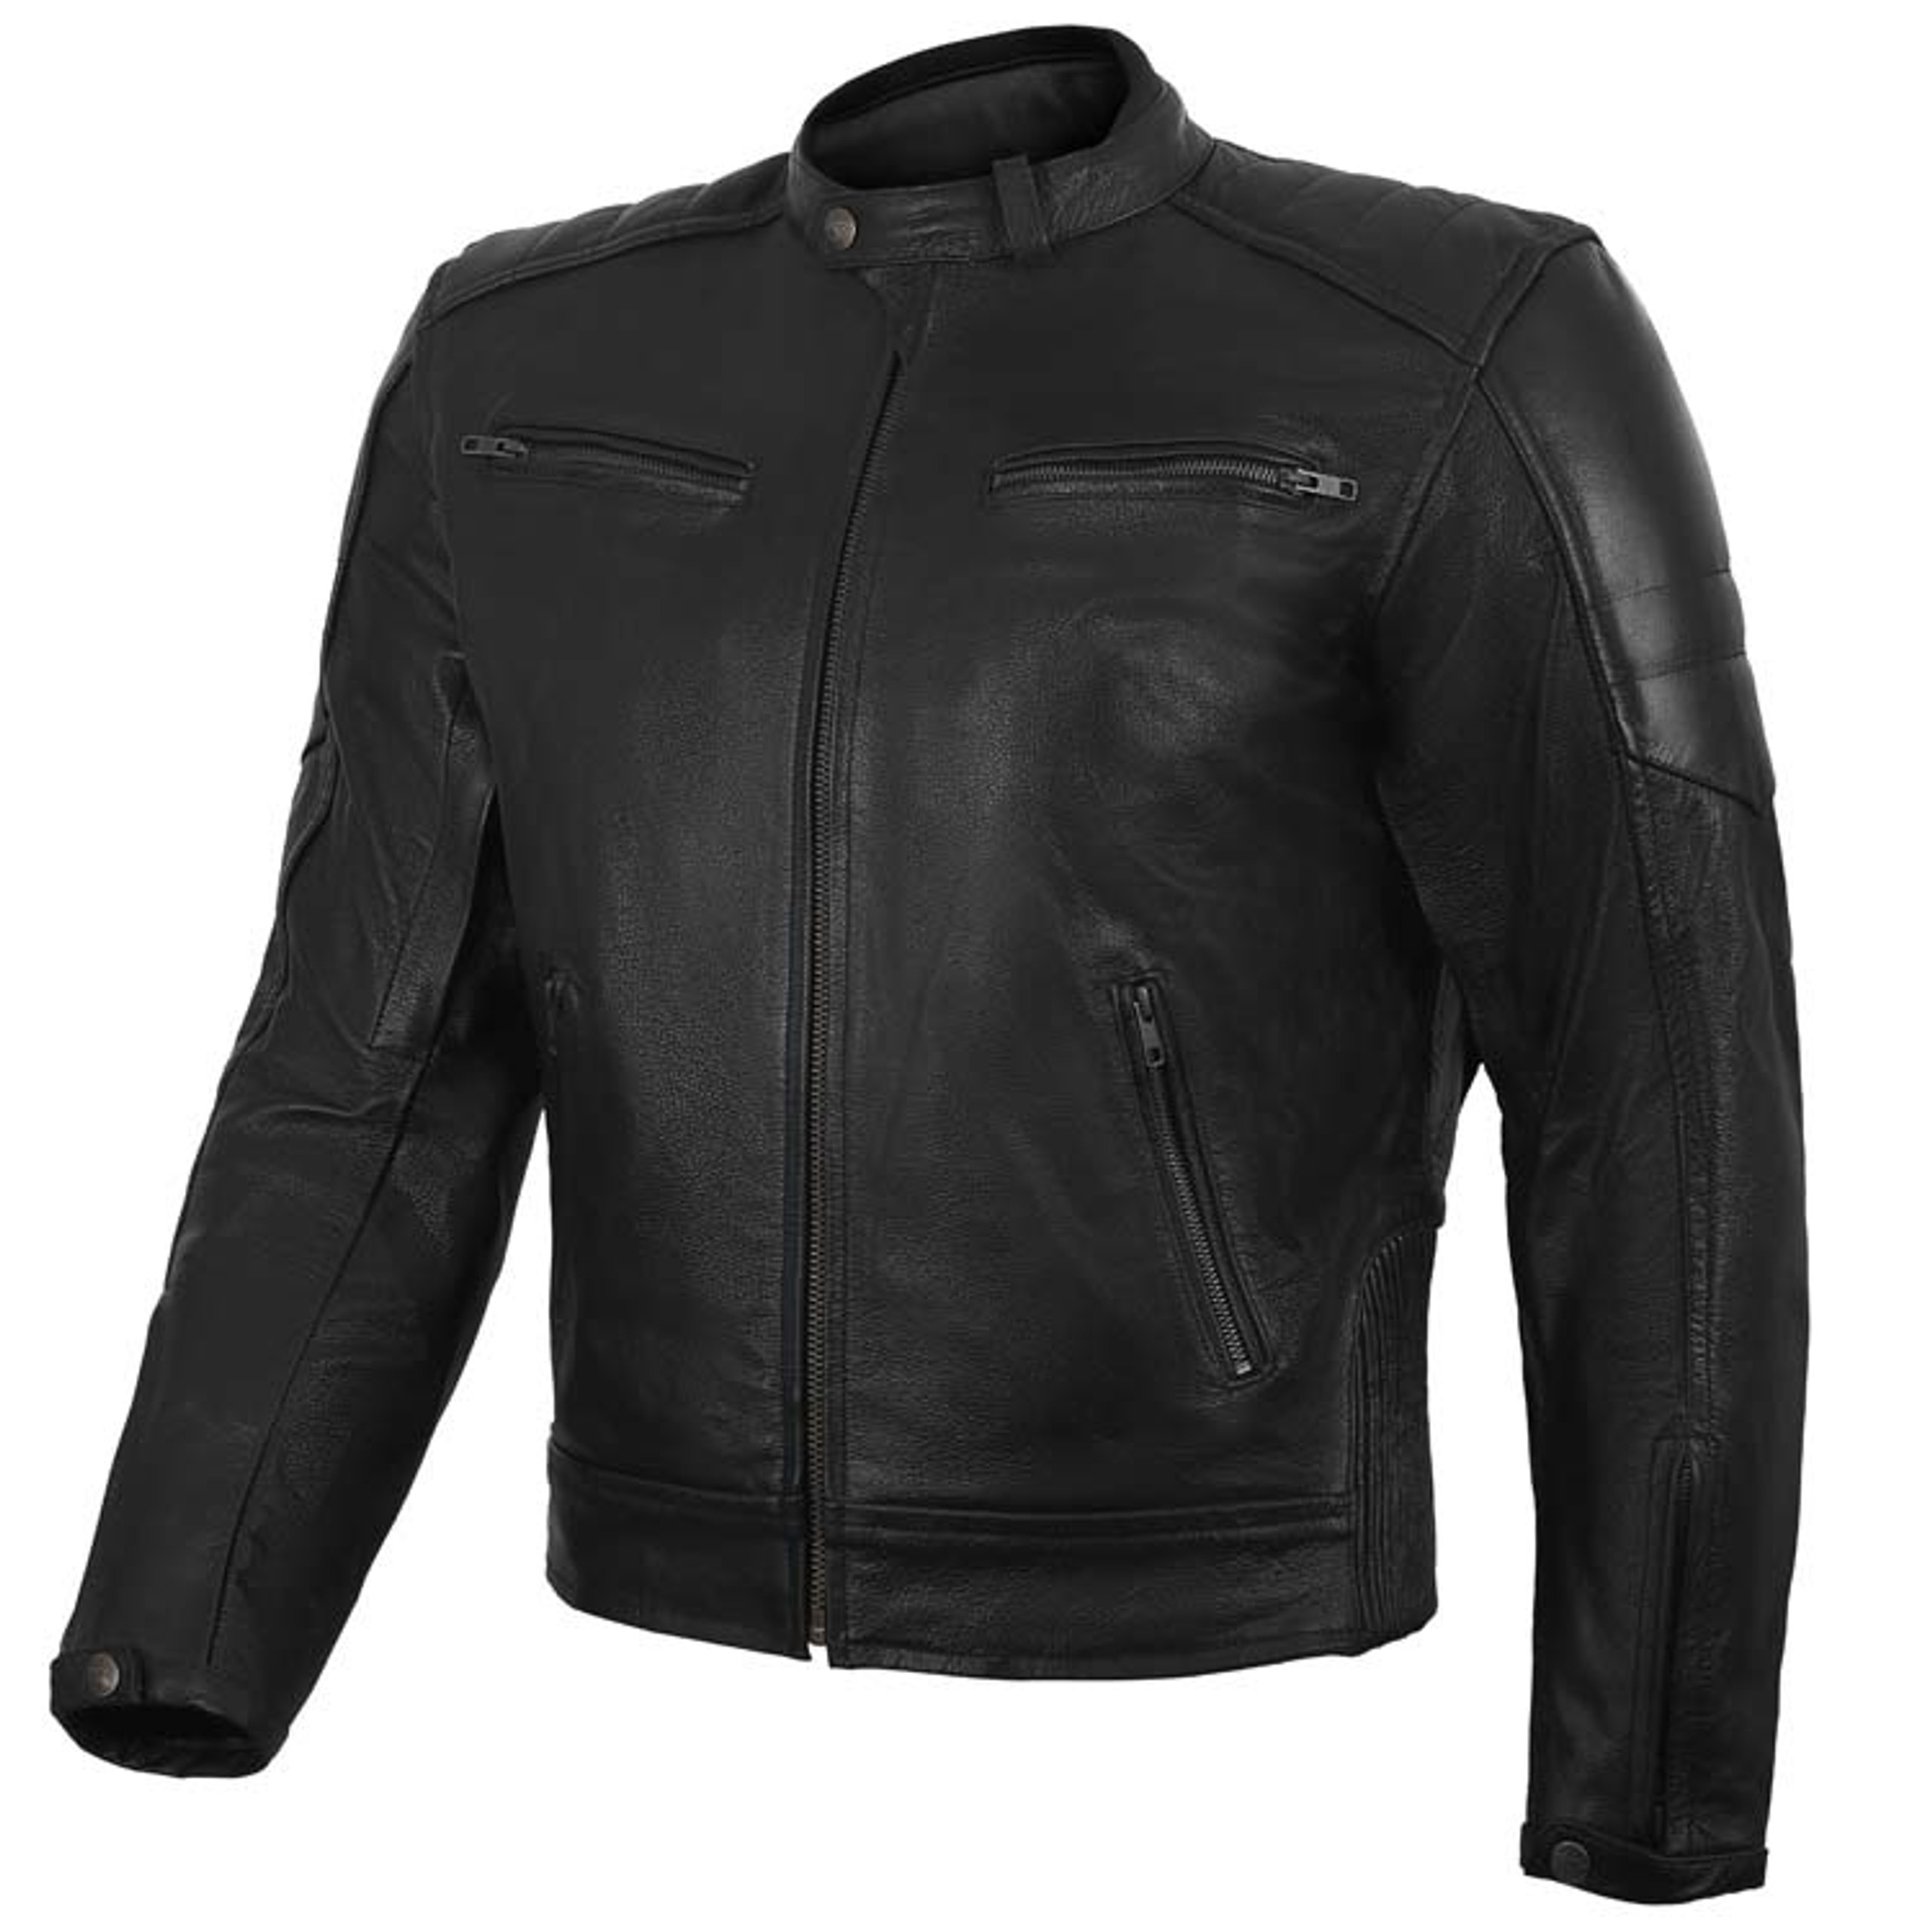 Motorcycle Clothing and Biker Gear Online - Rhinoleather